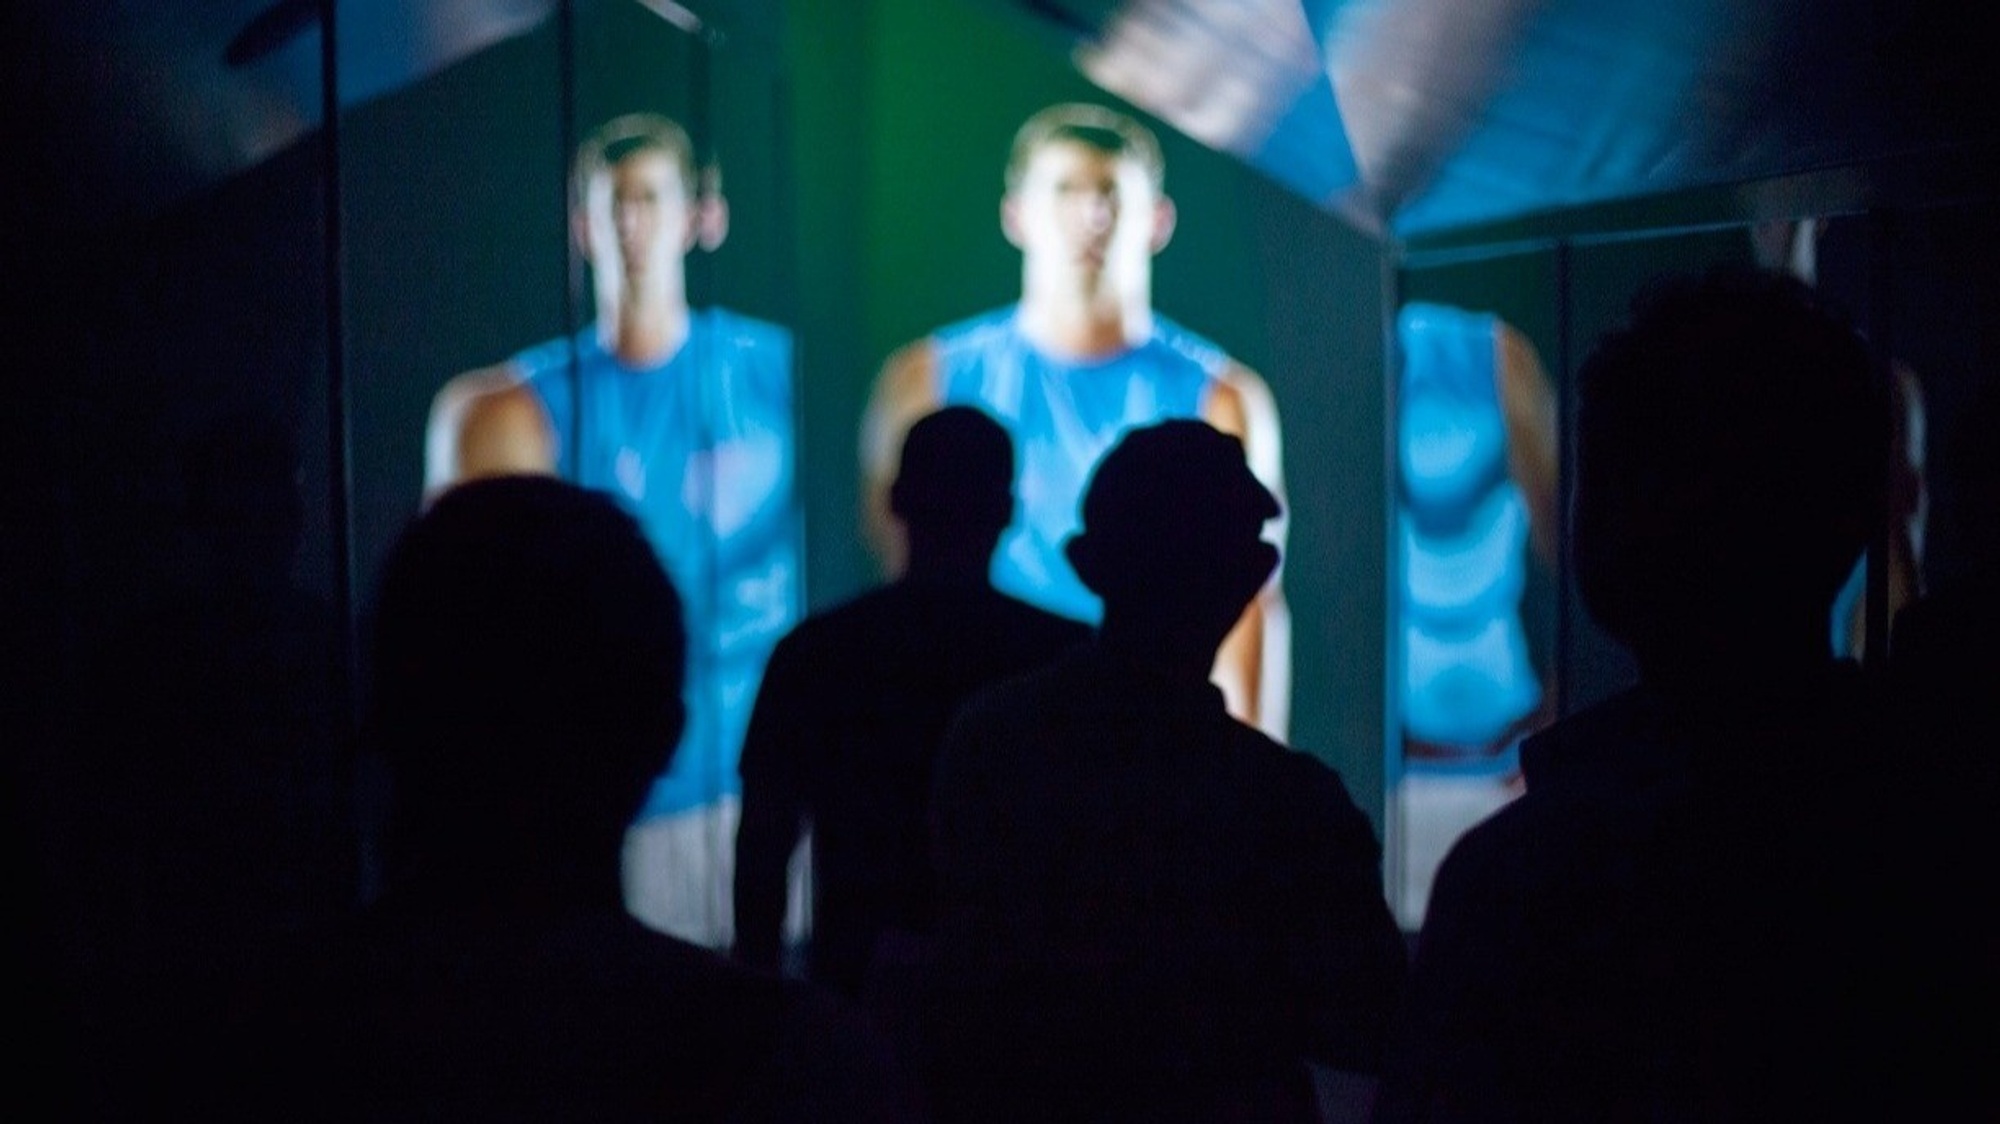 People standing in a dark room with Michael Phelps of angled digital surfaces